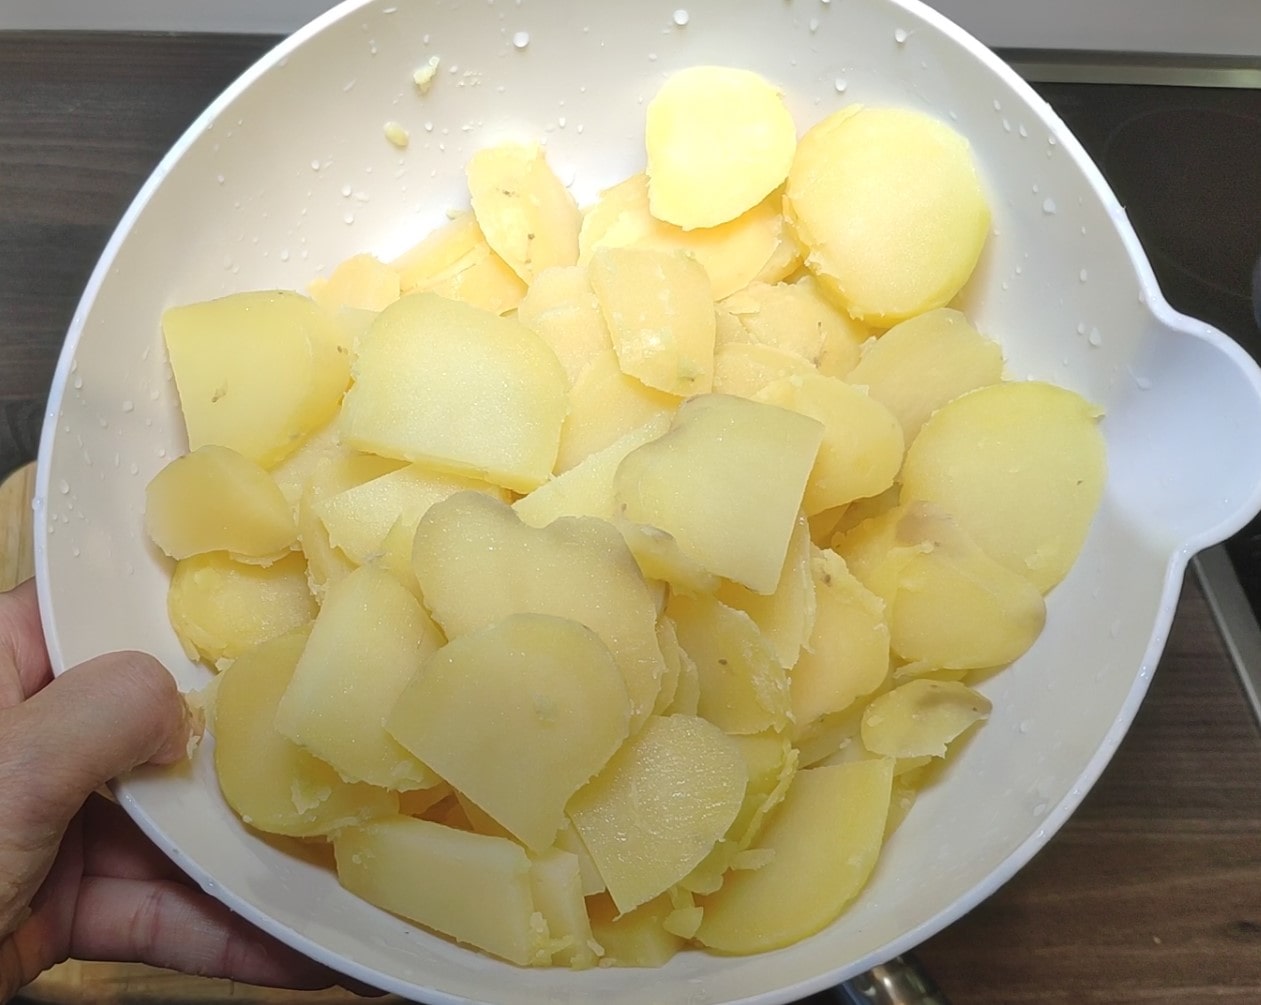 Peel and cut the potato_German potato salad_simple grandma recipe_cold with mayo and pickles_my life in germany_hkwomanabroad-min